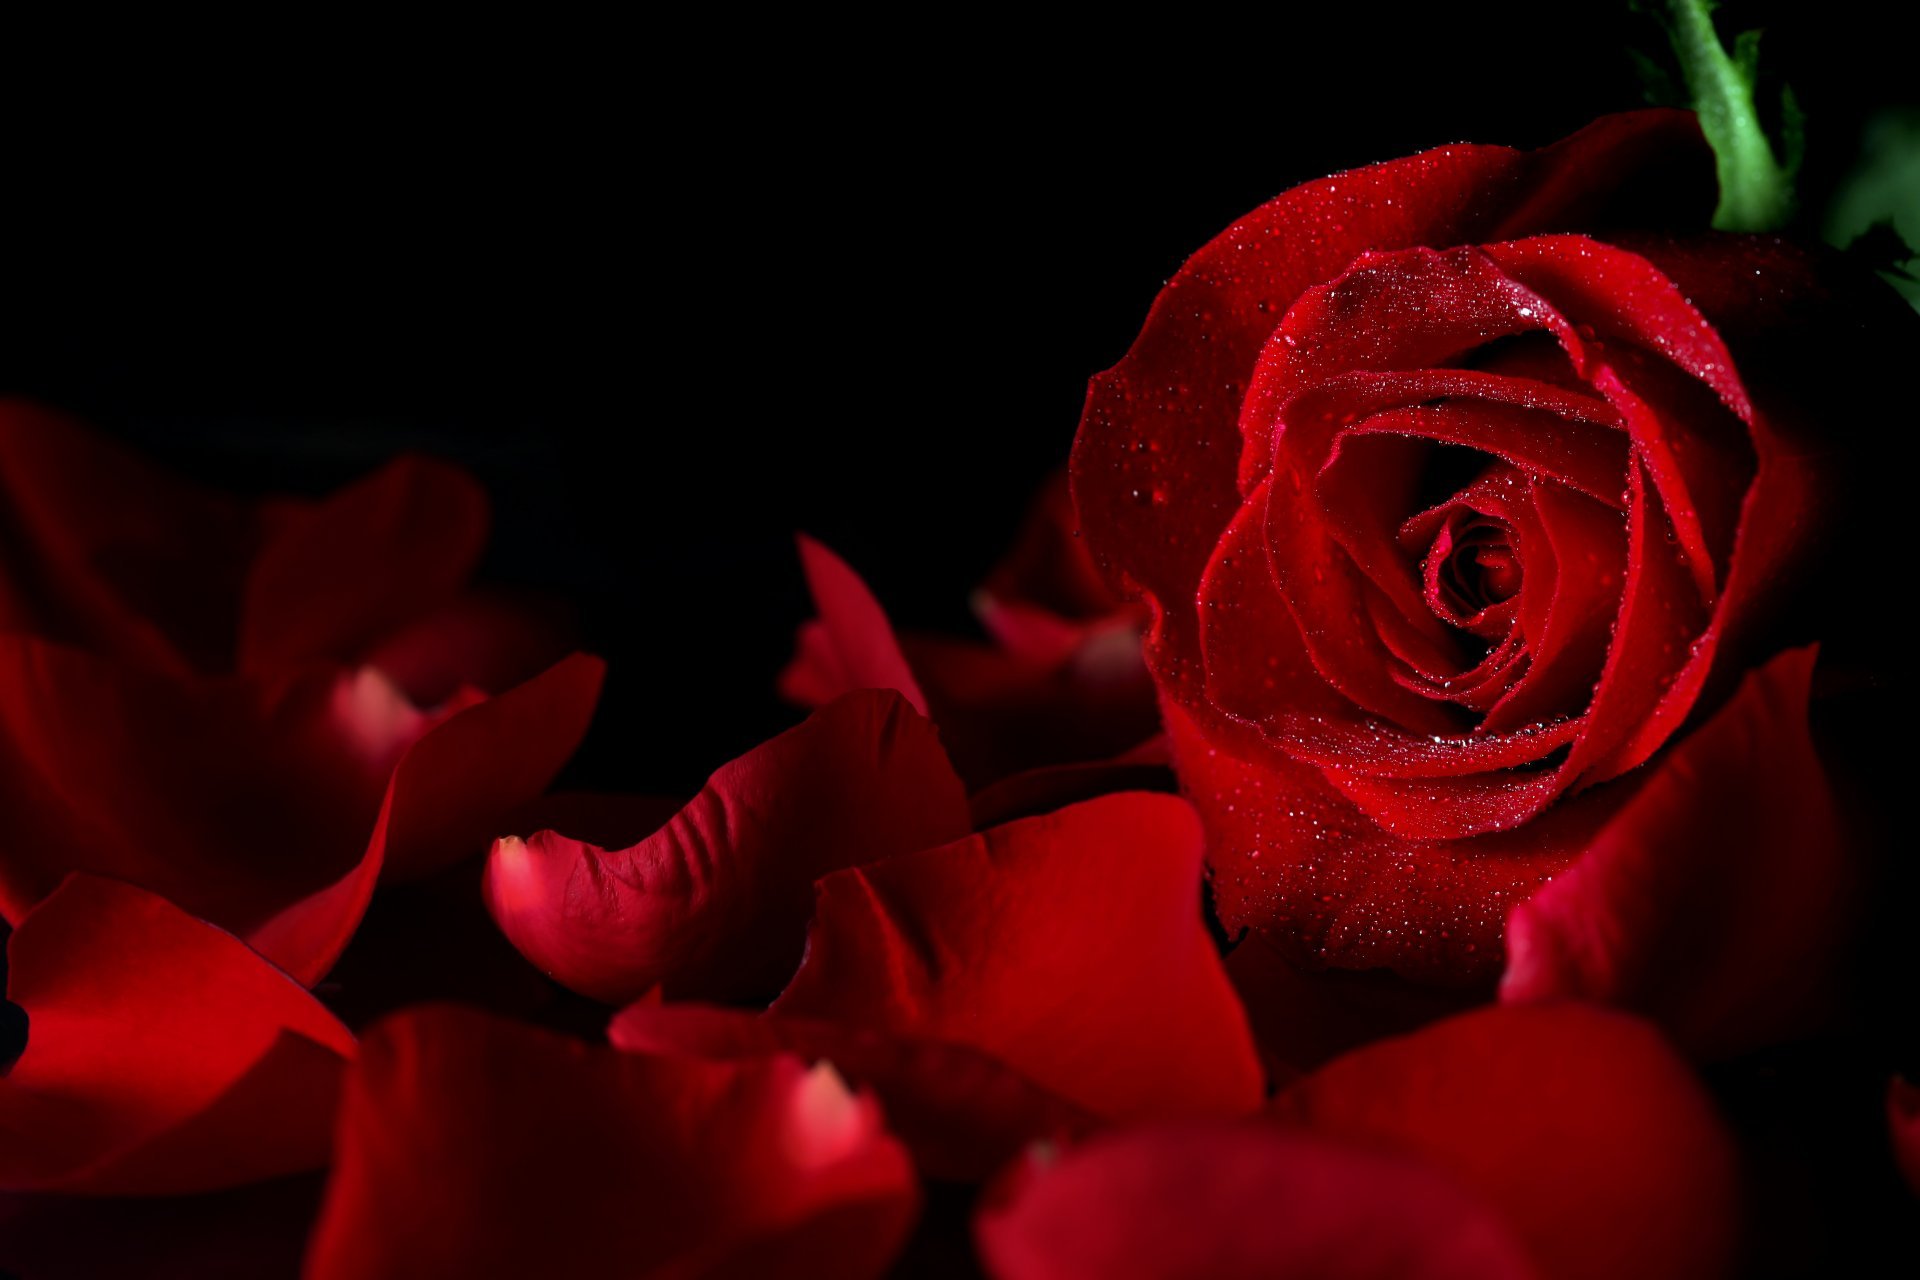 Free Download Rose Red Drops Bud Petals Black Background Flower HD Wallpaper X For